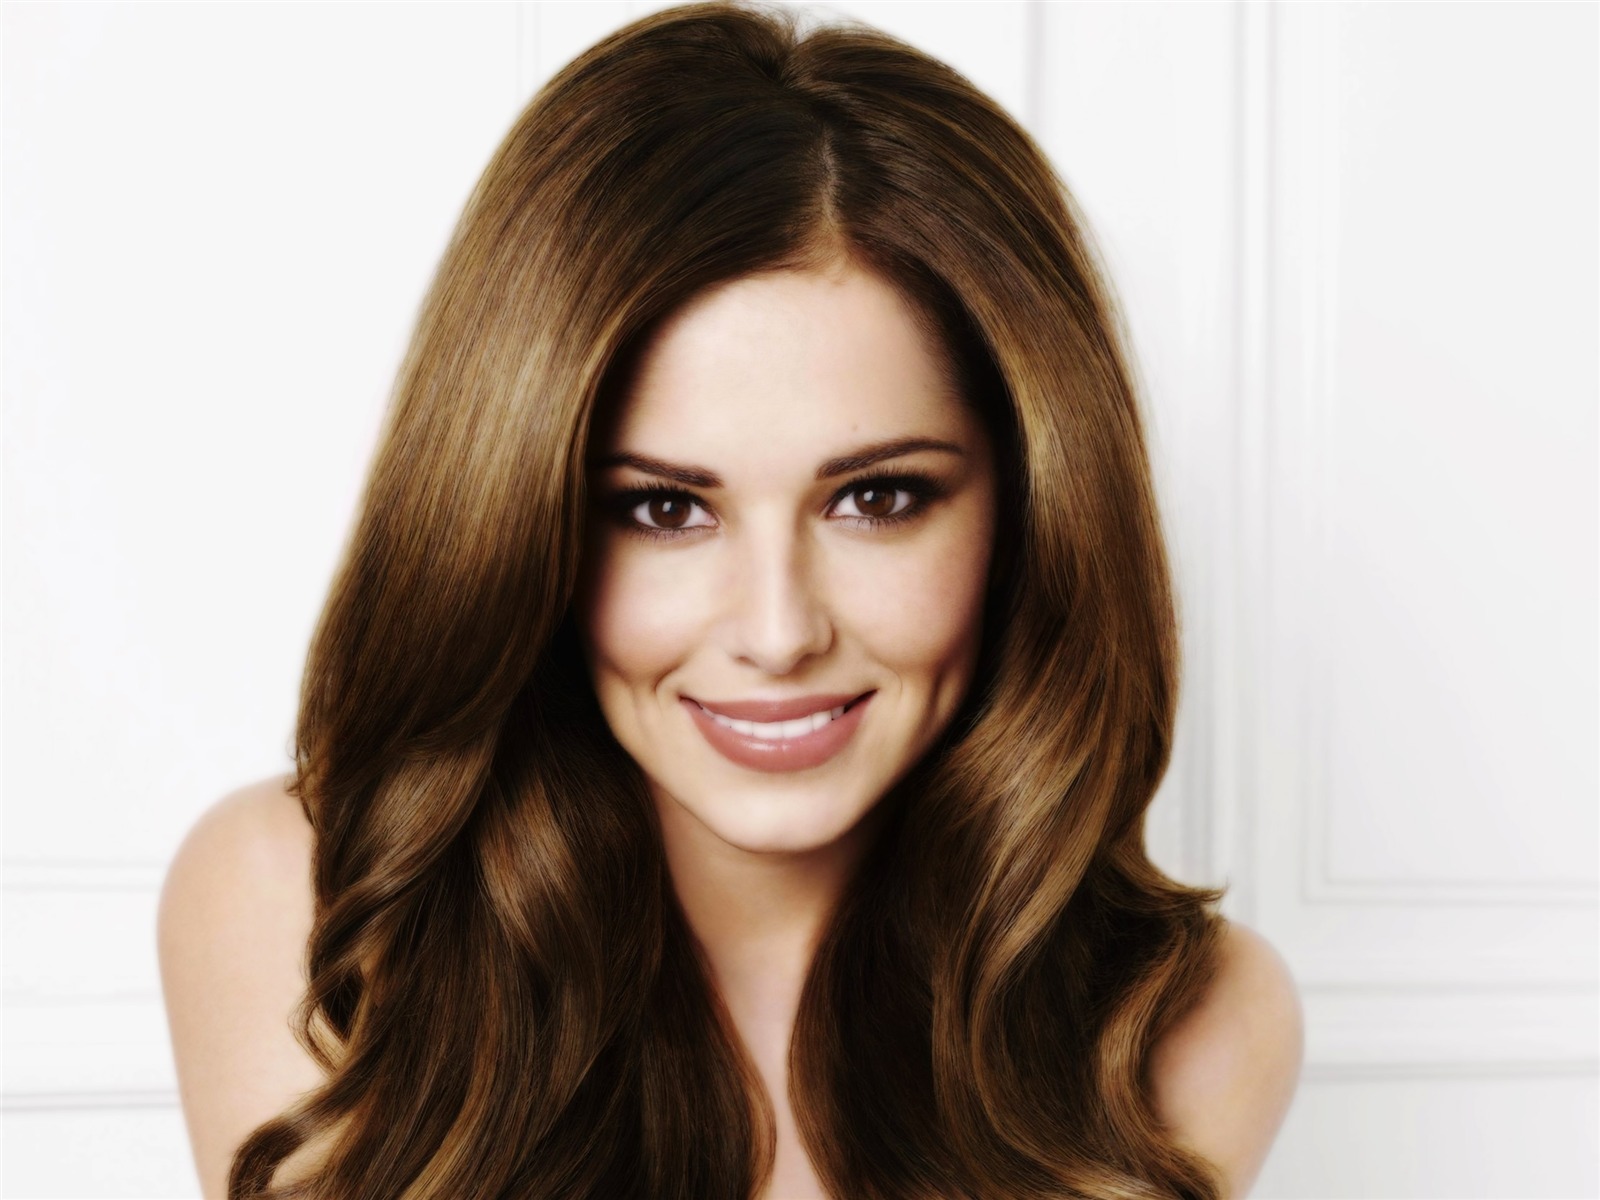 Cheryl Cole #019 - 1600x1200 Wallpapers Pictures Photos Images